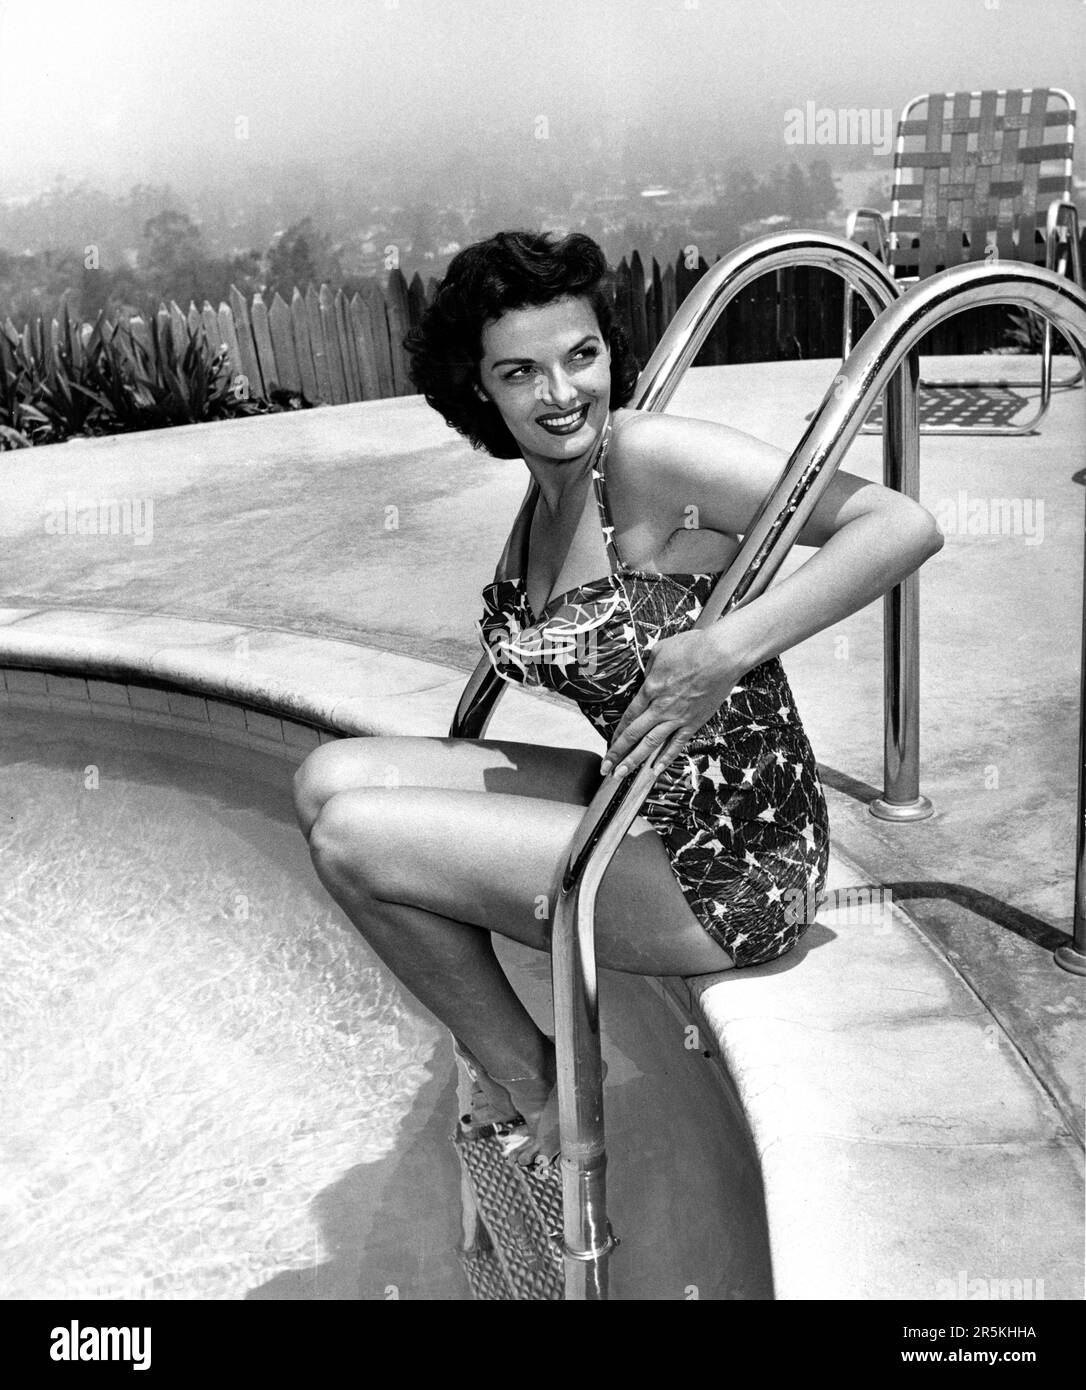 1950s swimsuit Black and White Stock Photos & Images - Alamy